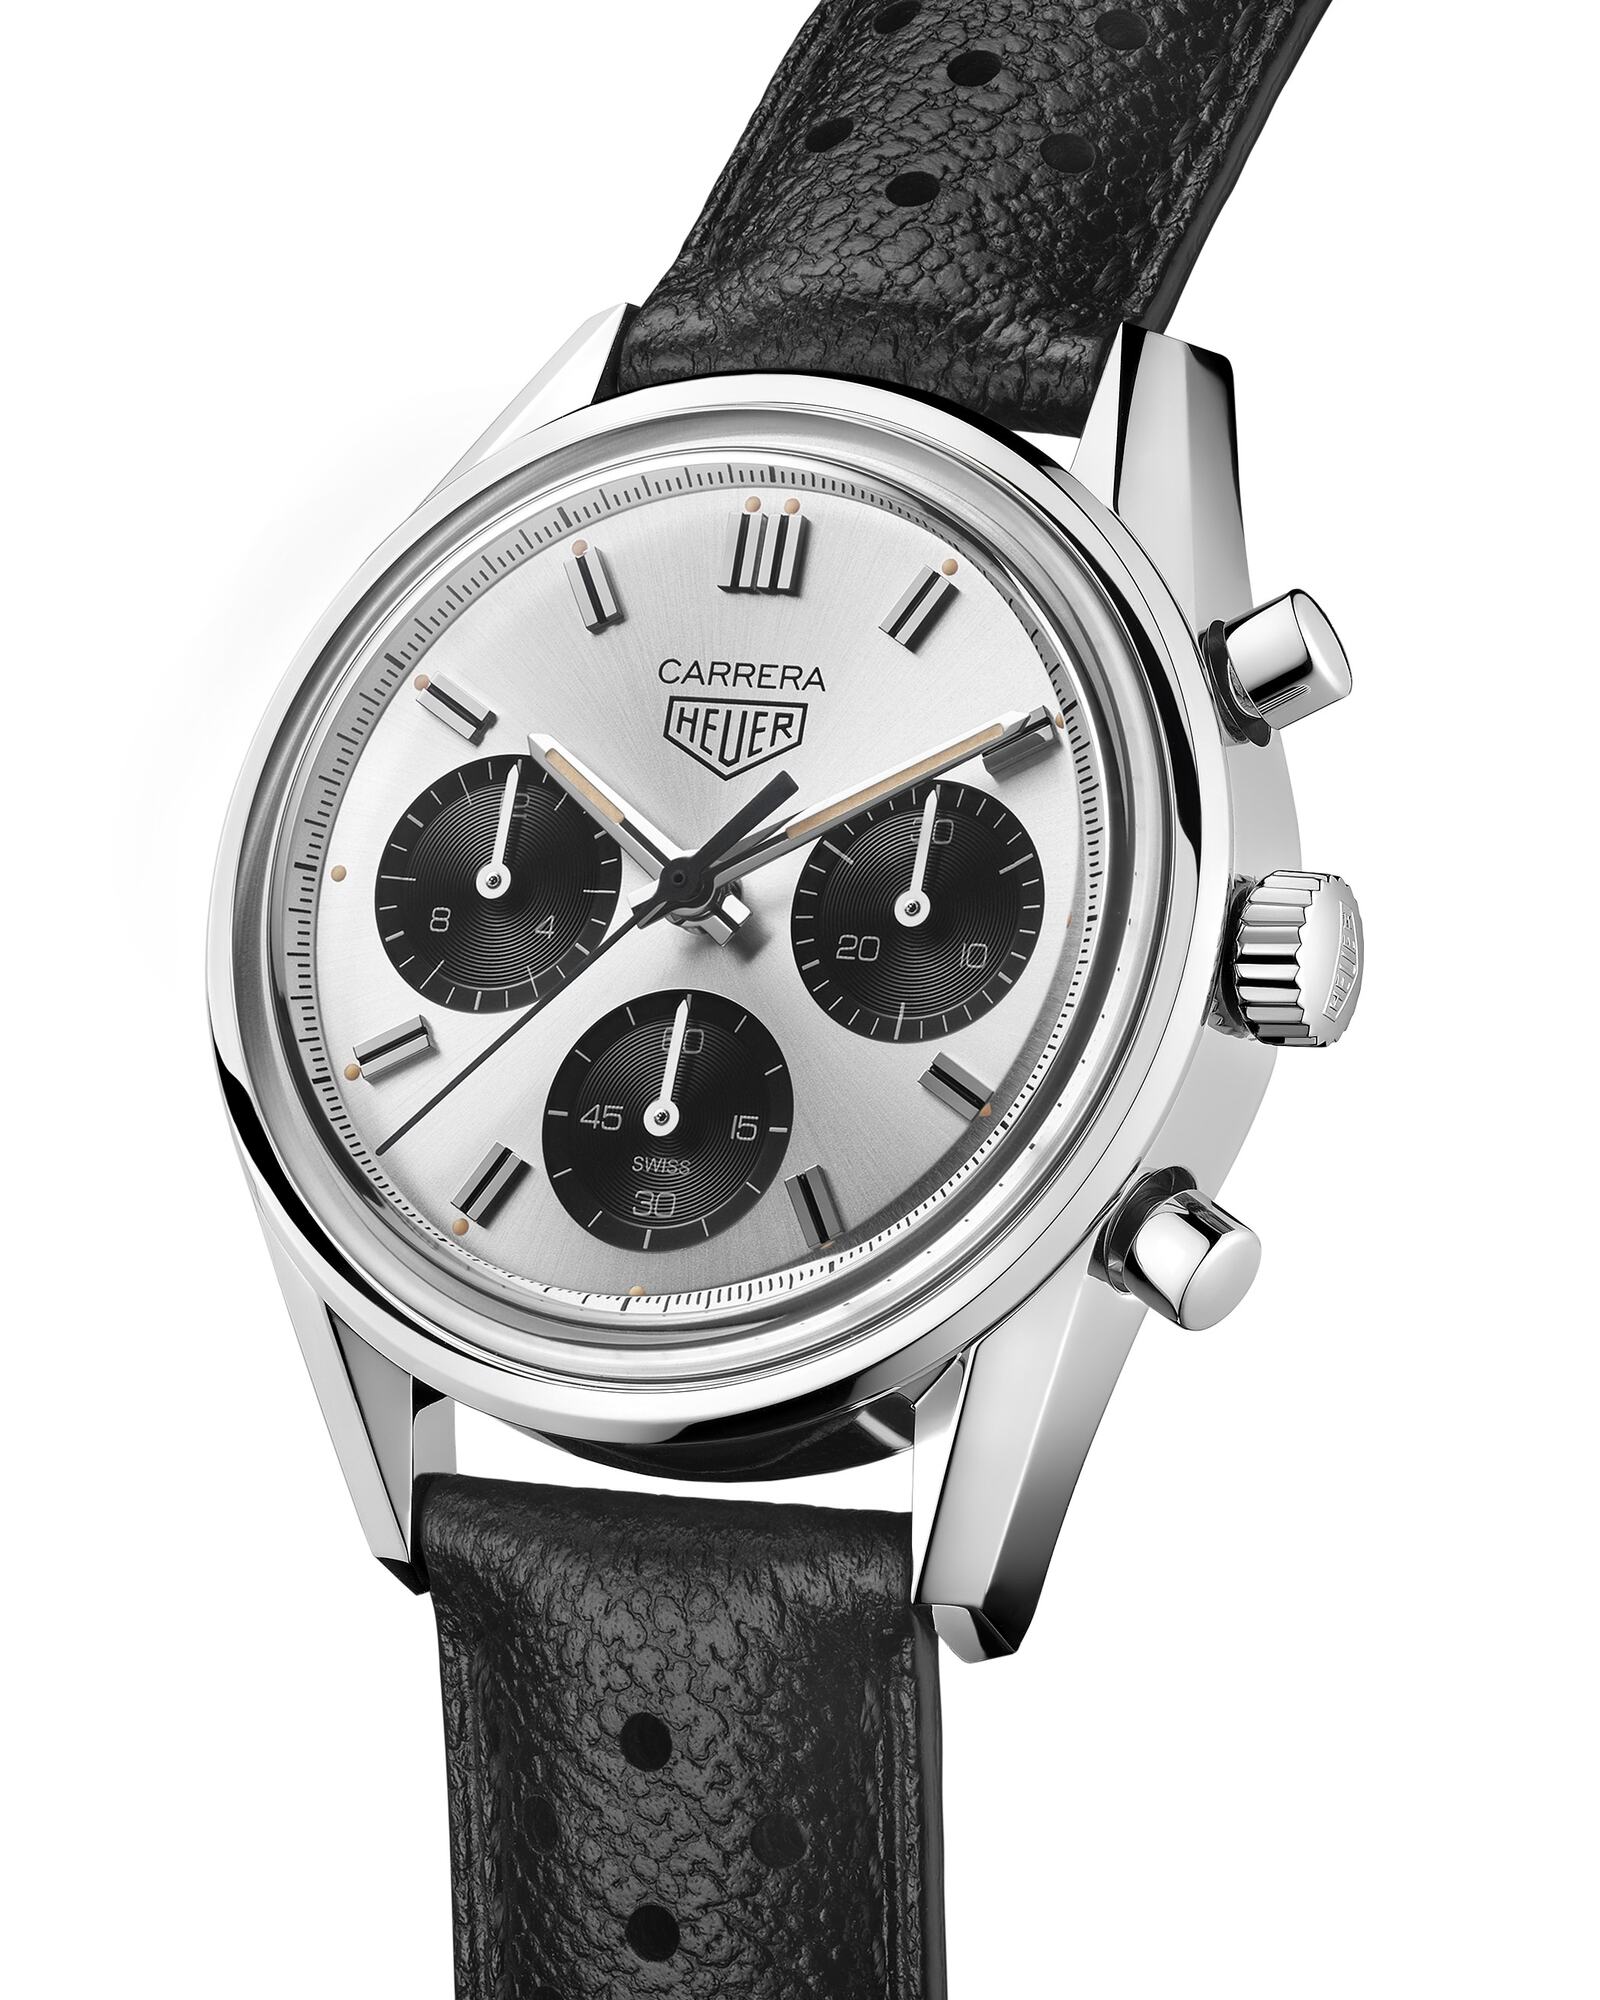 Tag Heuer, Swiss watch brand of the LVMH Group  - Sede di Milano